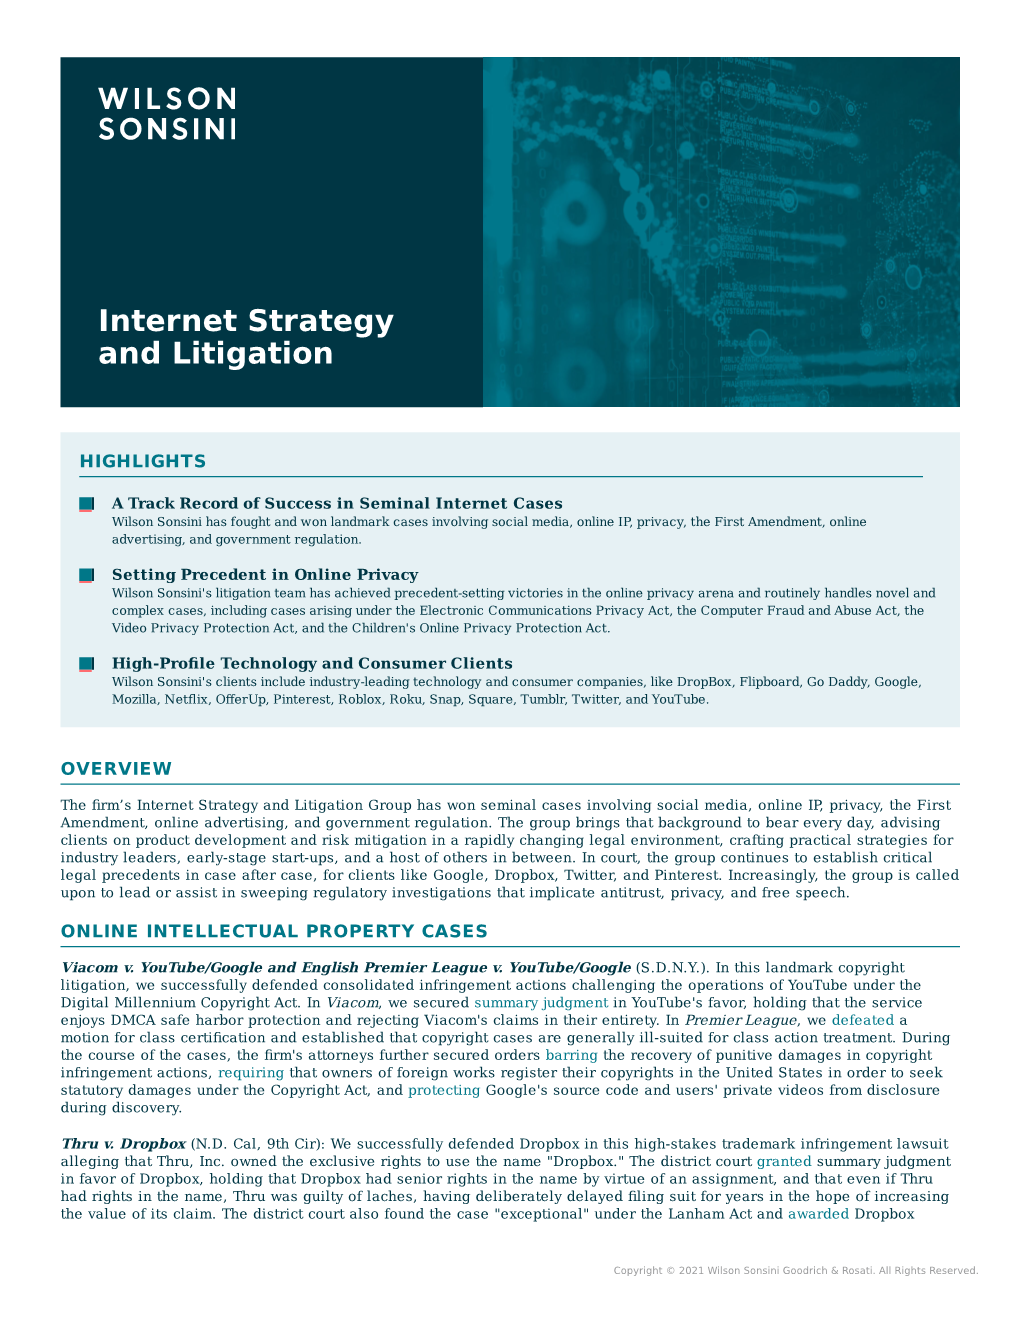 Internet Strategy and Litigation